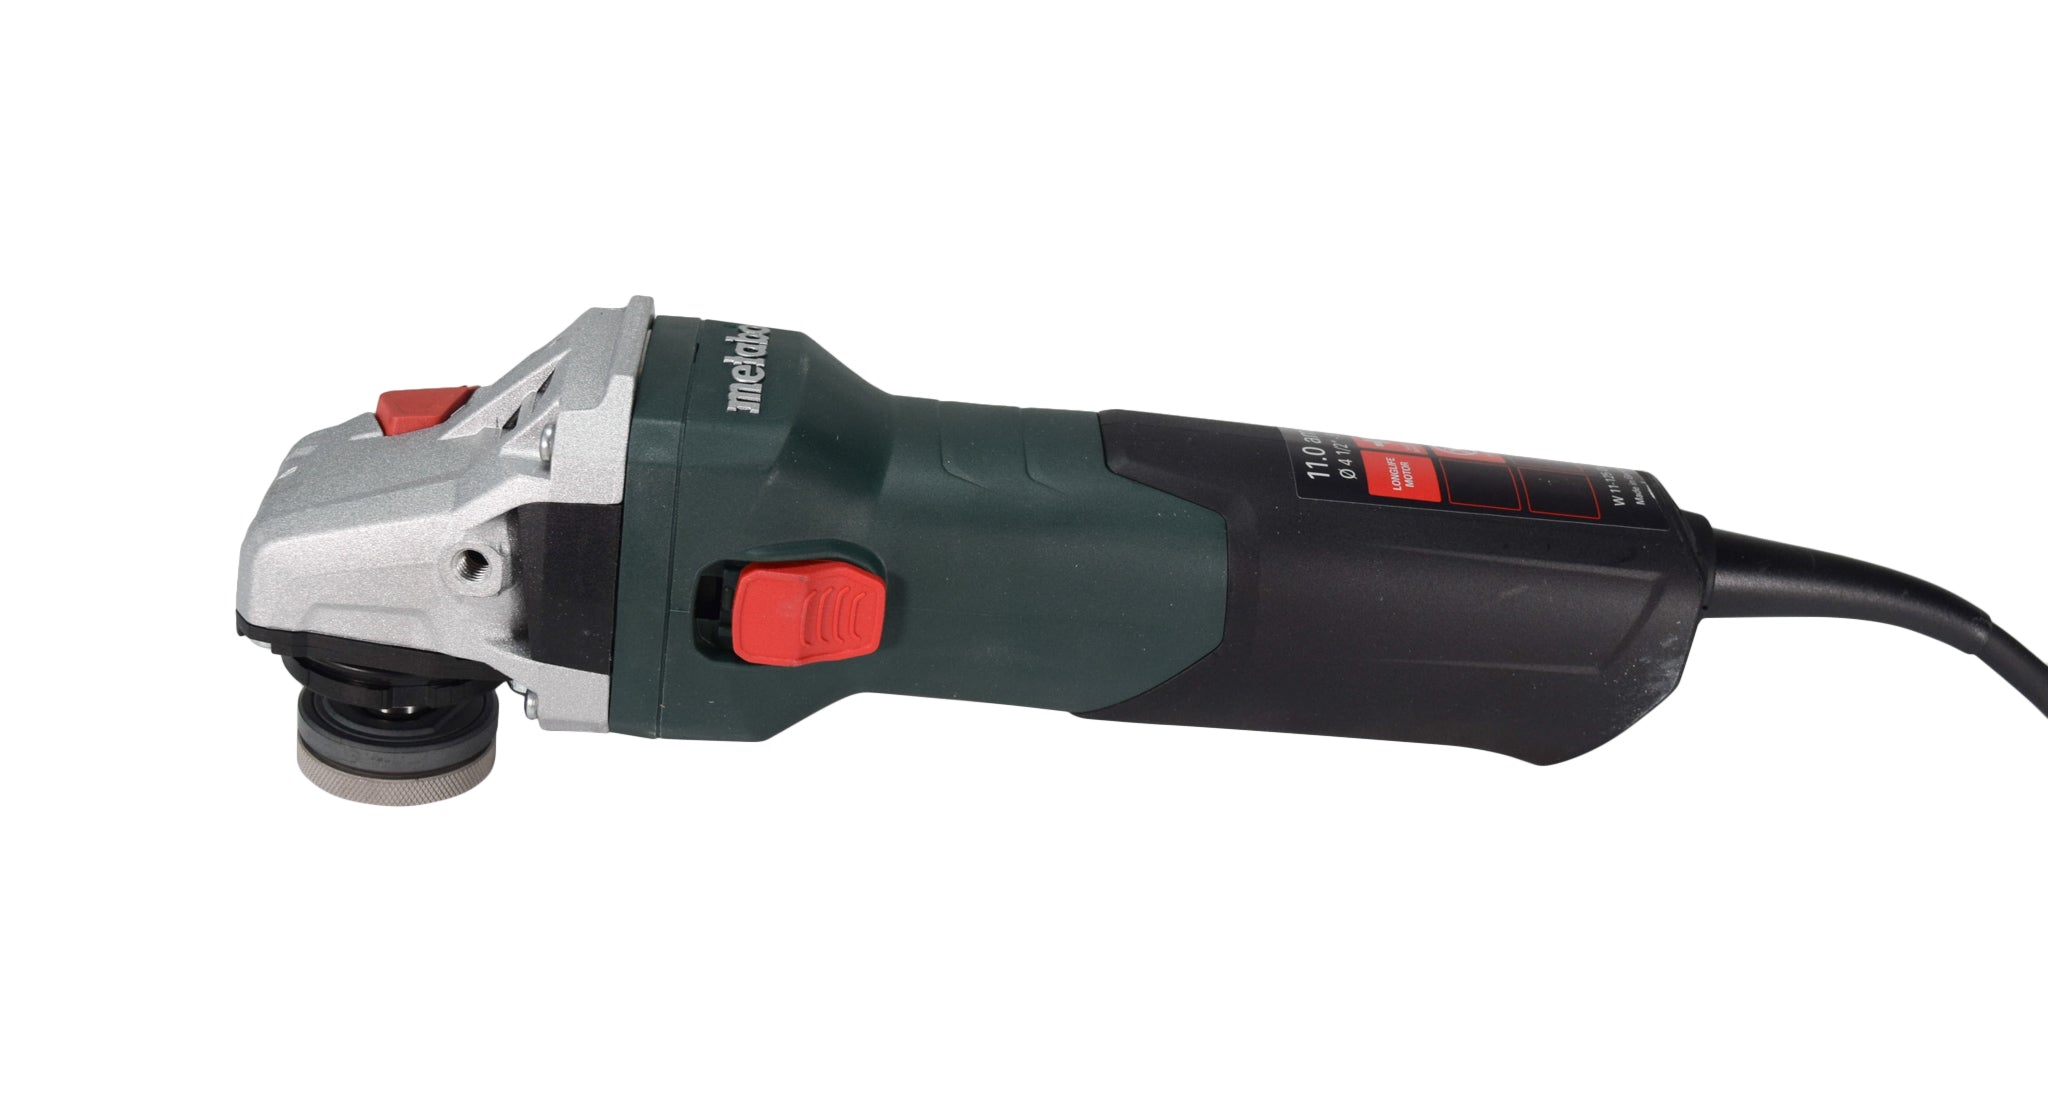 Metabo-603623420-4.5-inch-5-inch-Angle-Grinder-11-000-Rpm-11.0-Amps-with-Lock-on-image-3